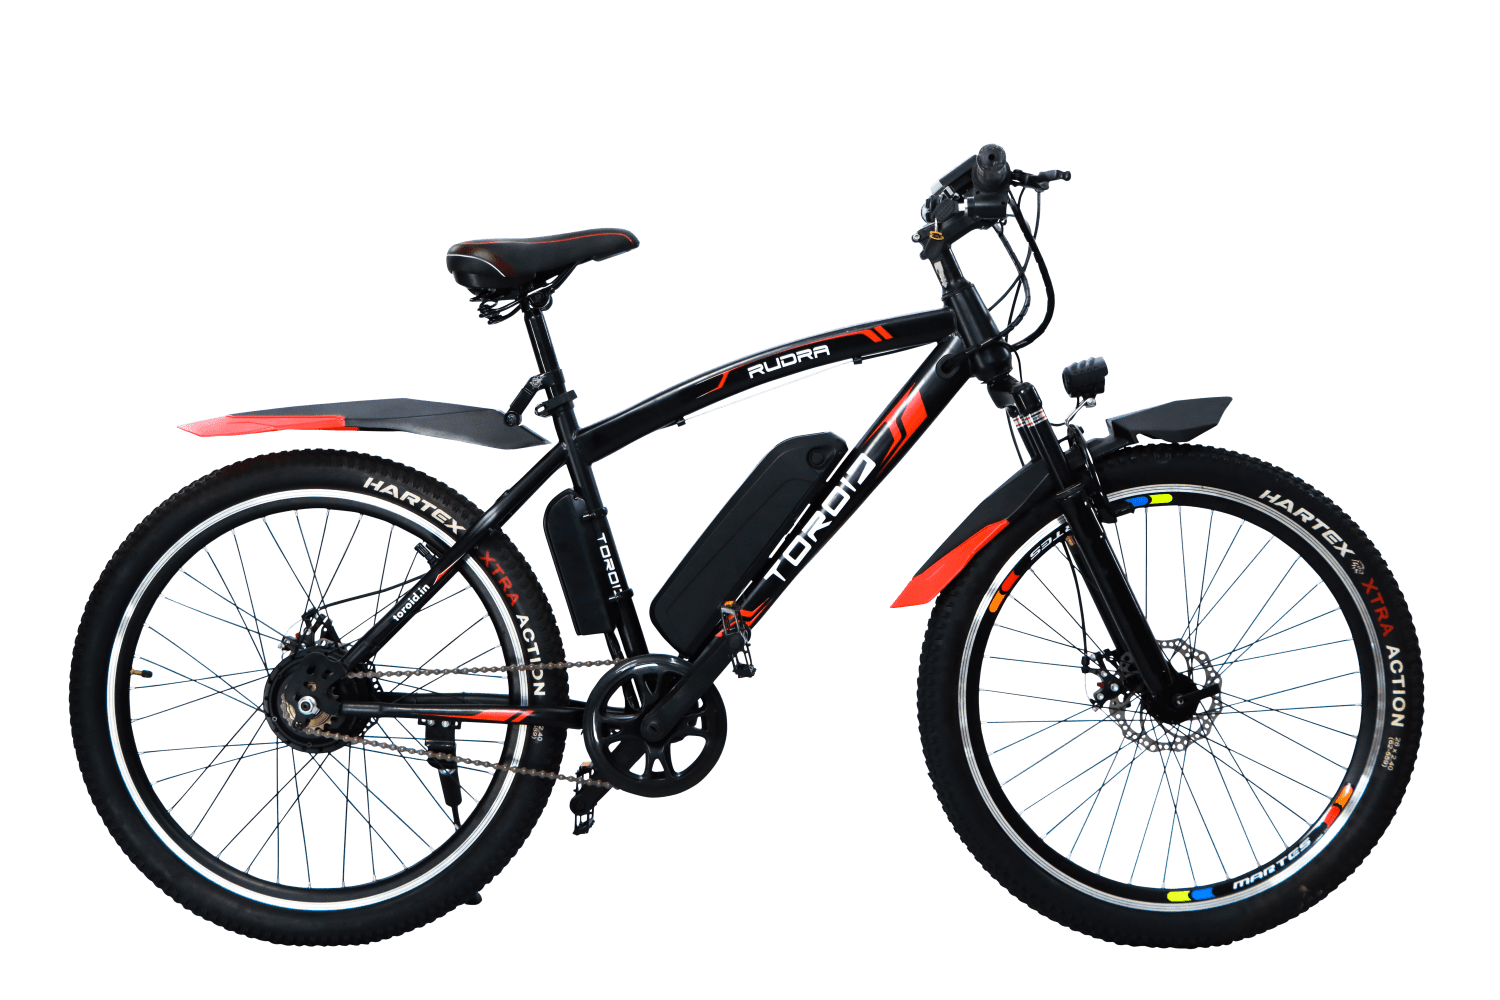 Rudra Electric cycle on sale